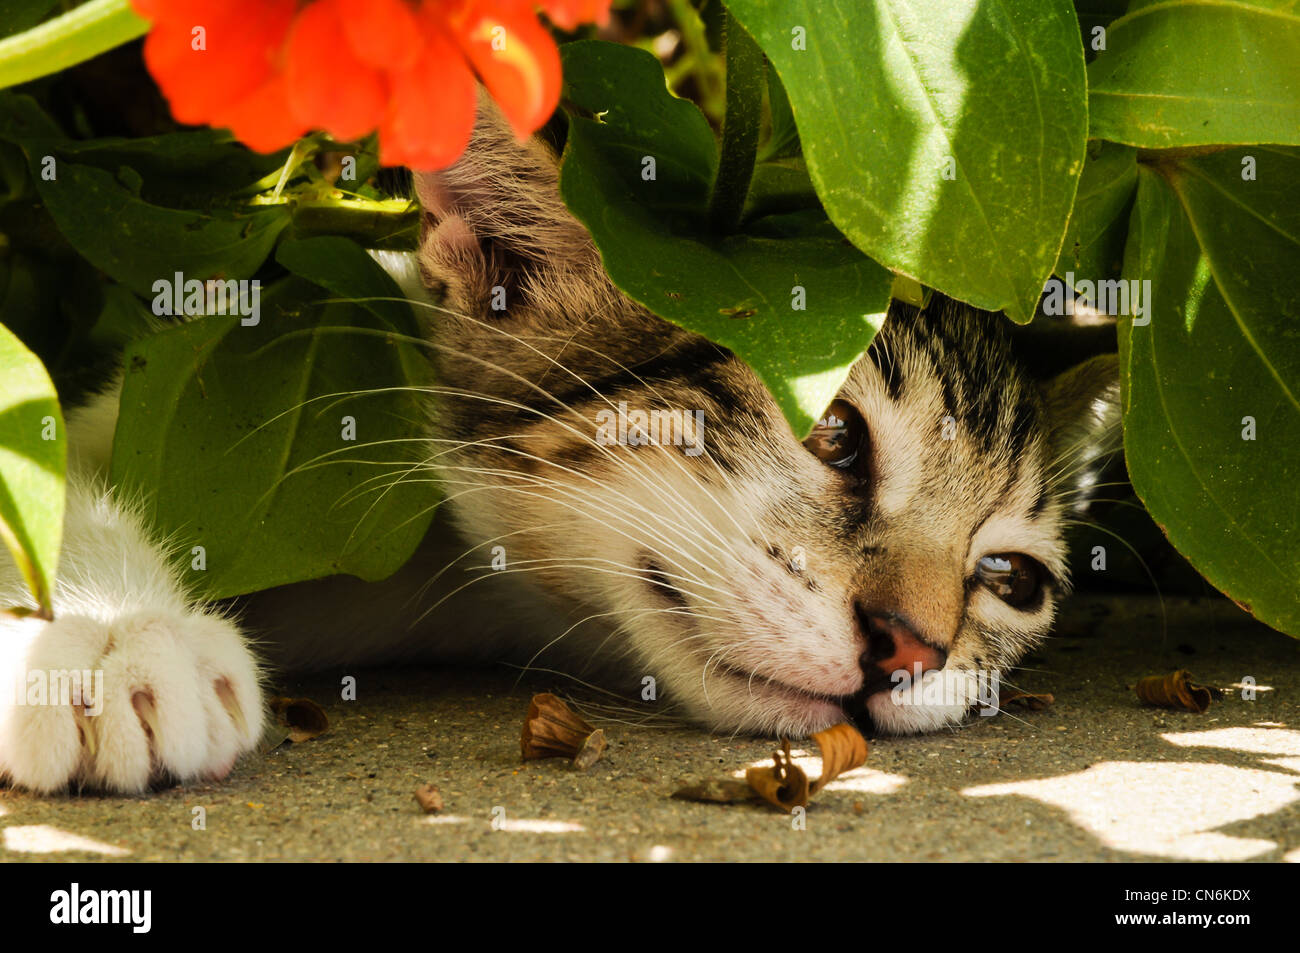 Gray, white and black cat playing  in flowerbed with orange flowwer Stock Photo